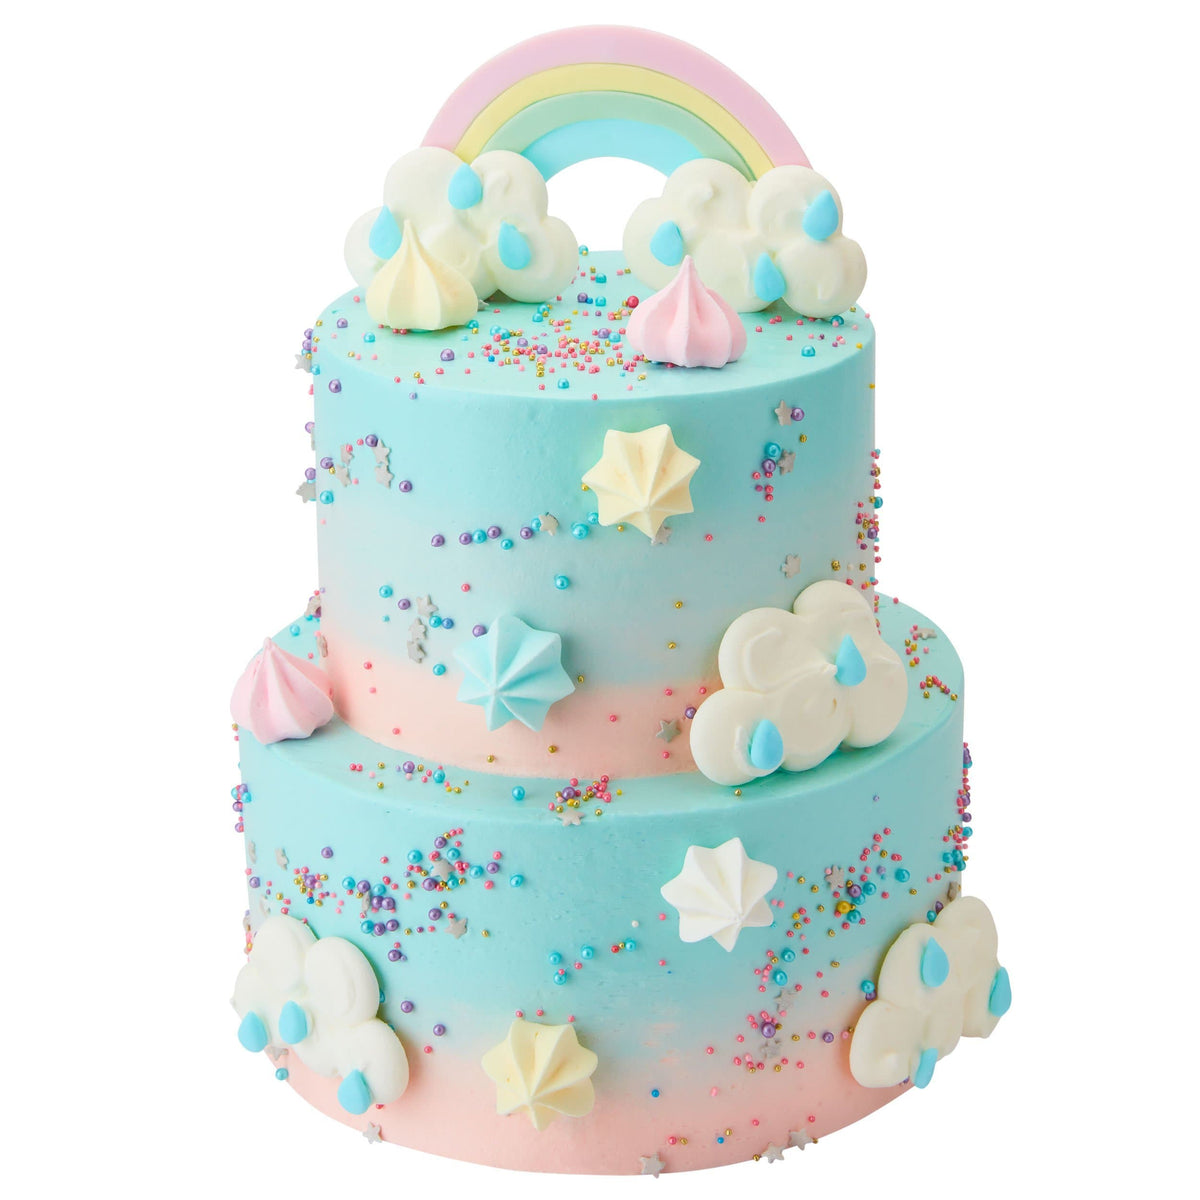 Cream Fantasy Cloud Cake + Girl on Unicorn Rainbow Toppers | Delcie's  Desserts and Cakes